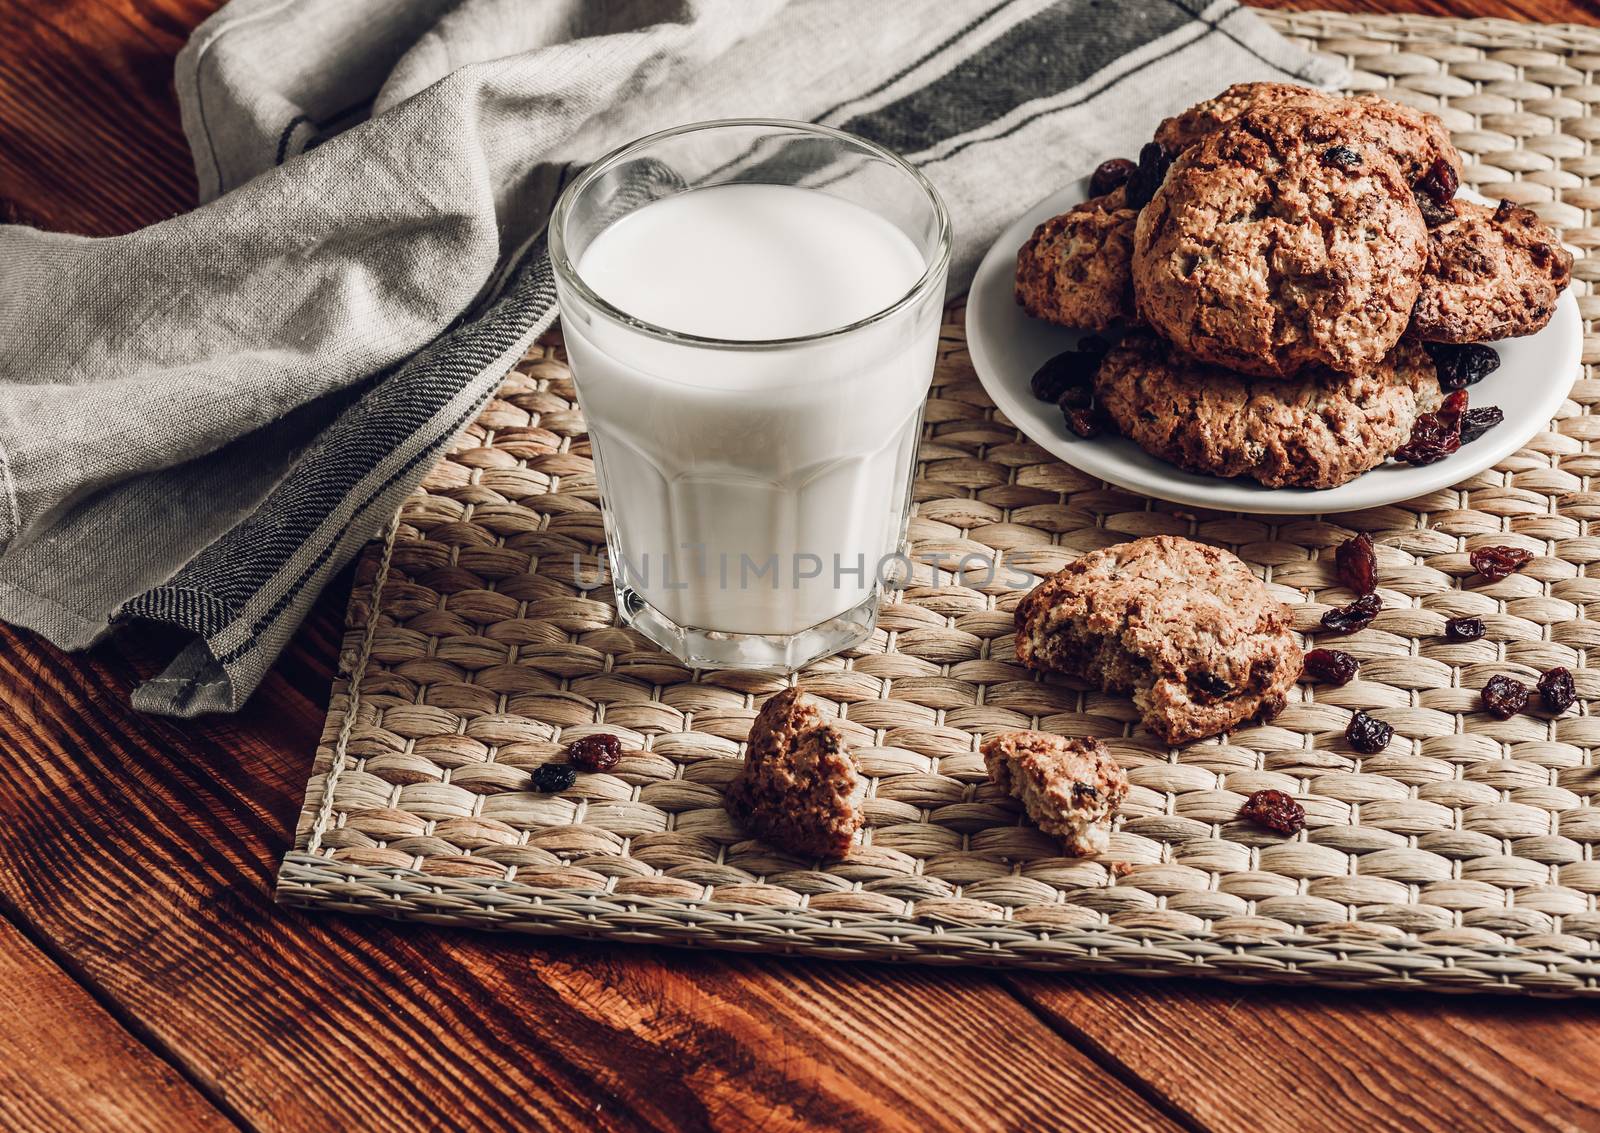 Milk with Oatmeal Cookies by Seva_blsv